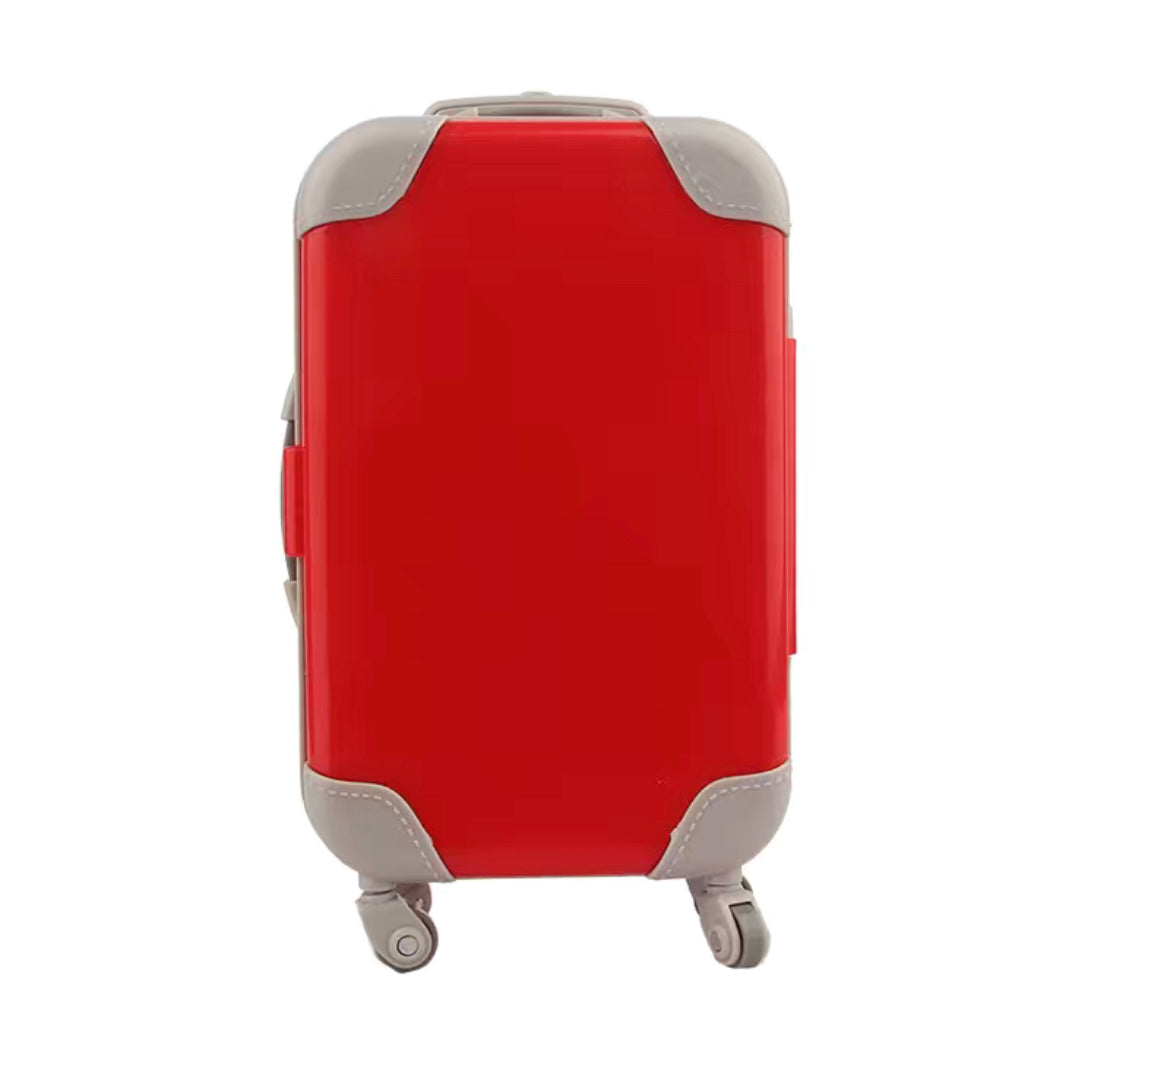 On Sale - Toy Suitcase